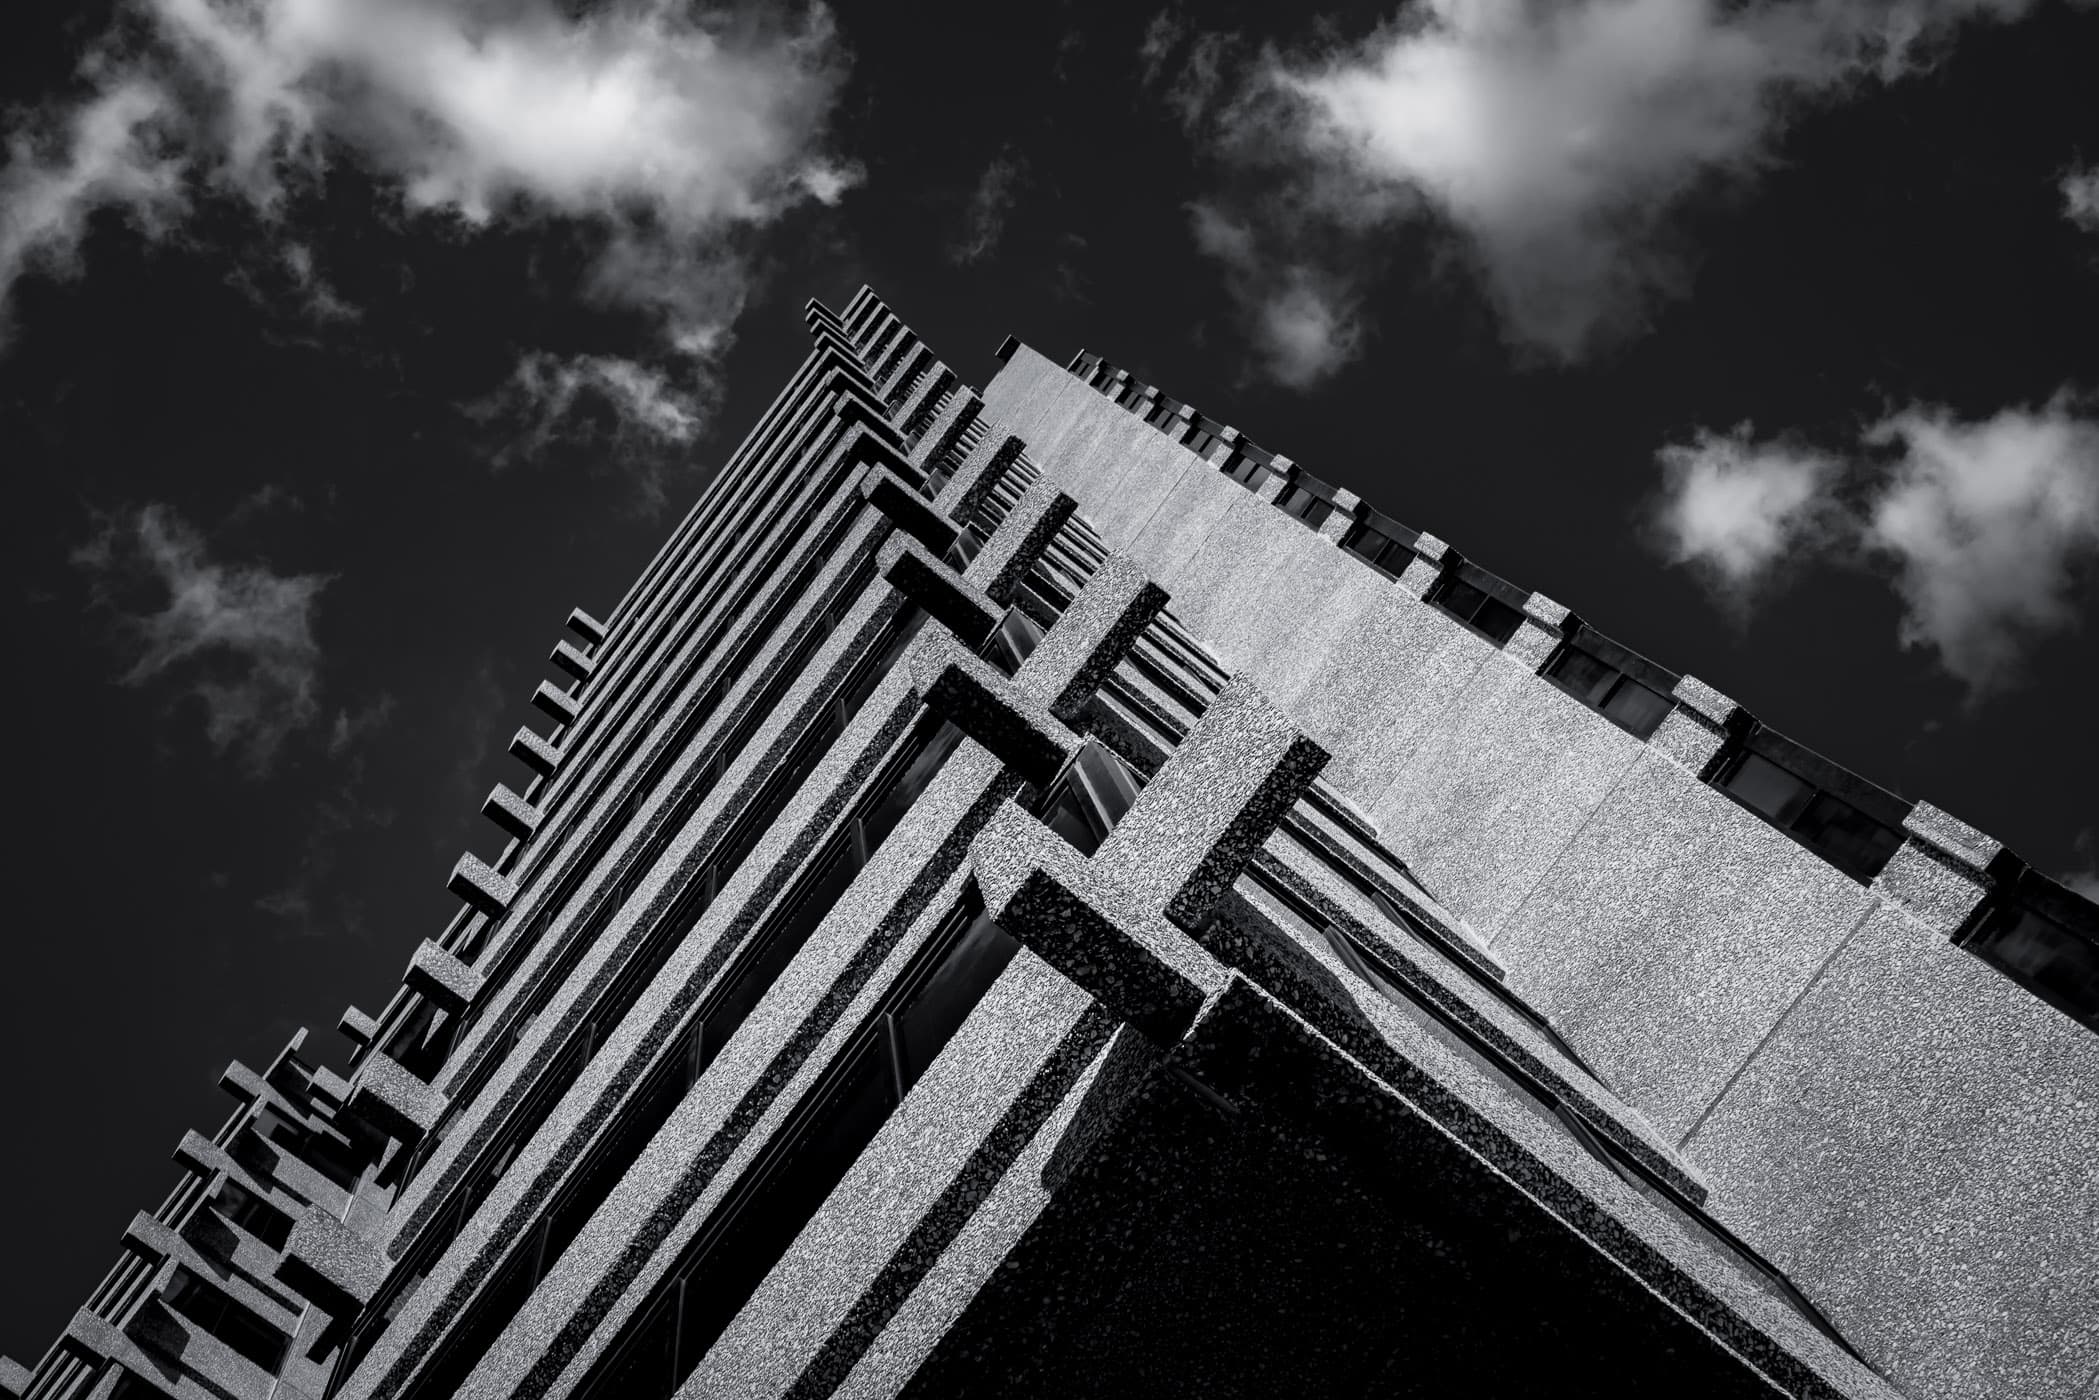 The architectural details of Dallas' Pegasus Villas, which was once Brookhollow Plaza, are a testament to the city's rich design heritage. This landmark showcases the visionary work of architect Paul Rudolph, featuring a 16-story structure that was originally built in the late 1960s. The building stands out with its precast concrete beams and columns, and its history as a re-purposed office building turned into a senior living community adds to its unique character.